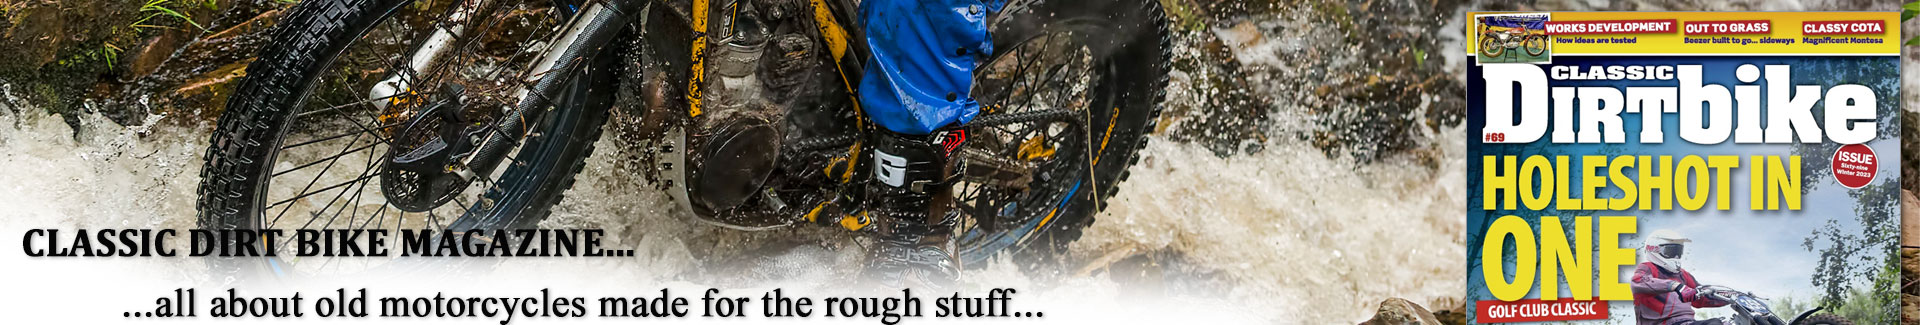 Classic Dirt Bike Magazine is all about old motorcycles made for the rough stuff